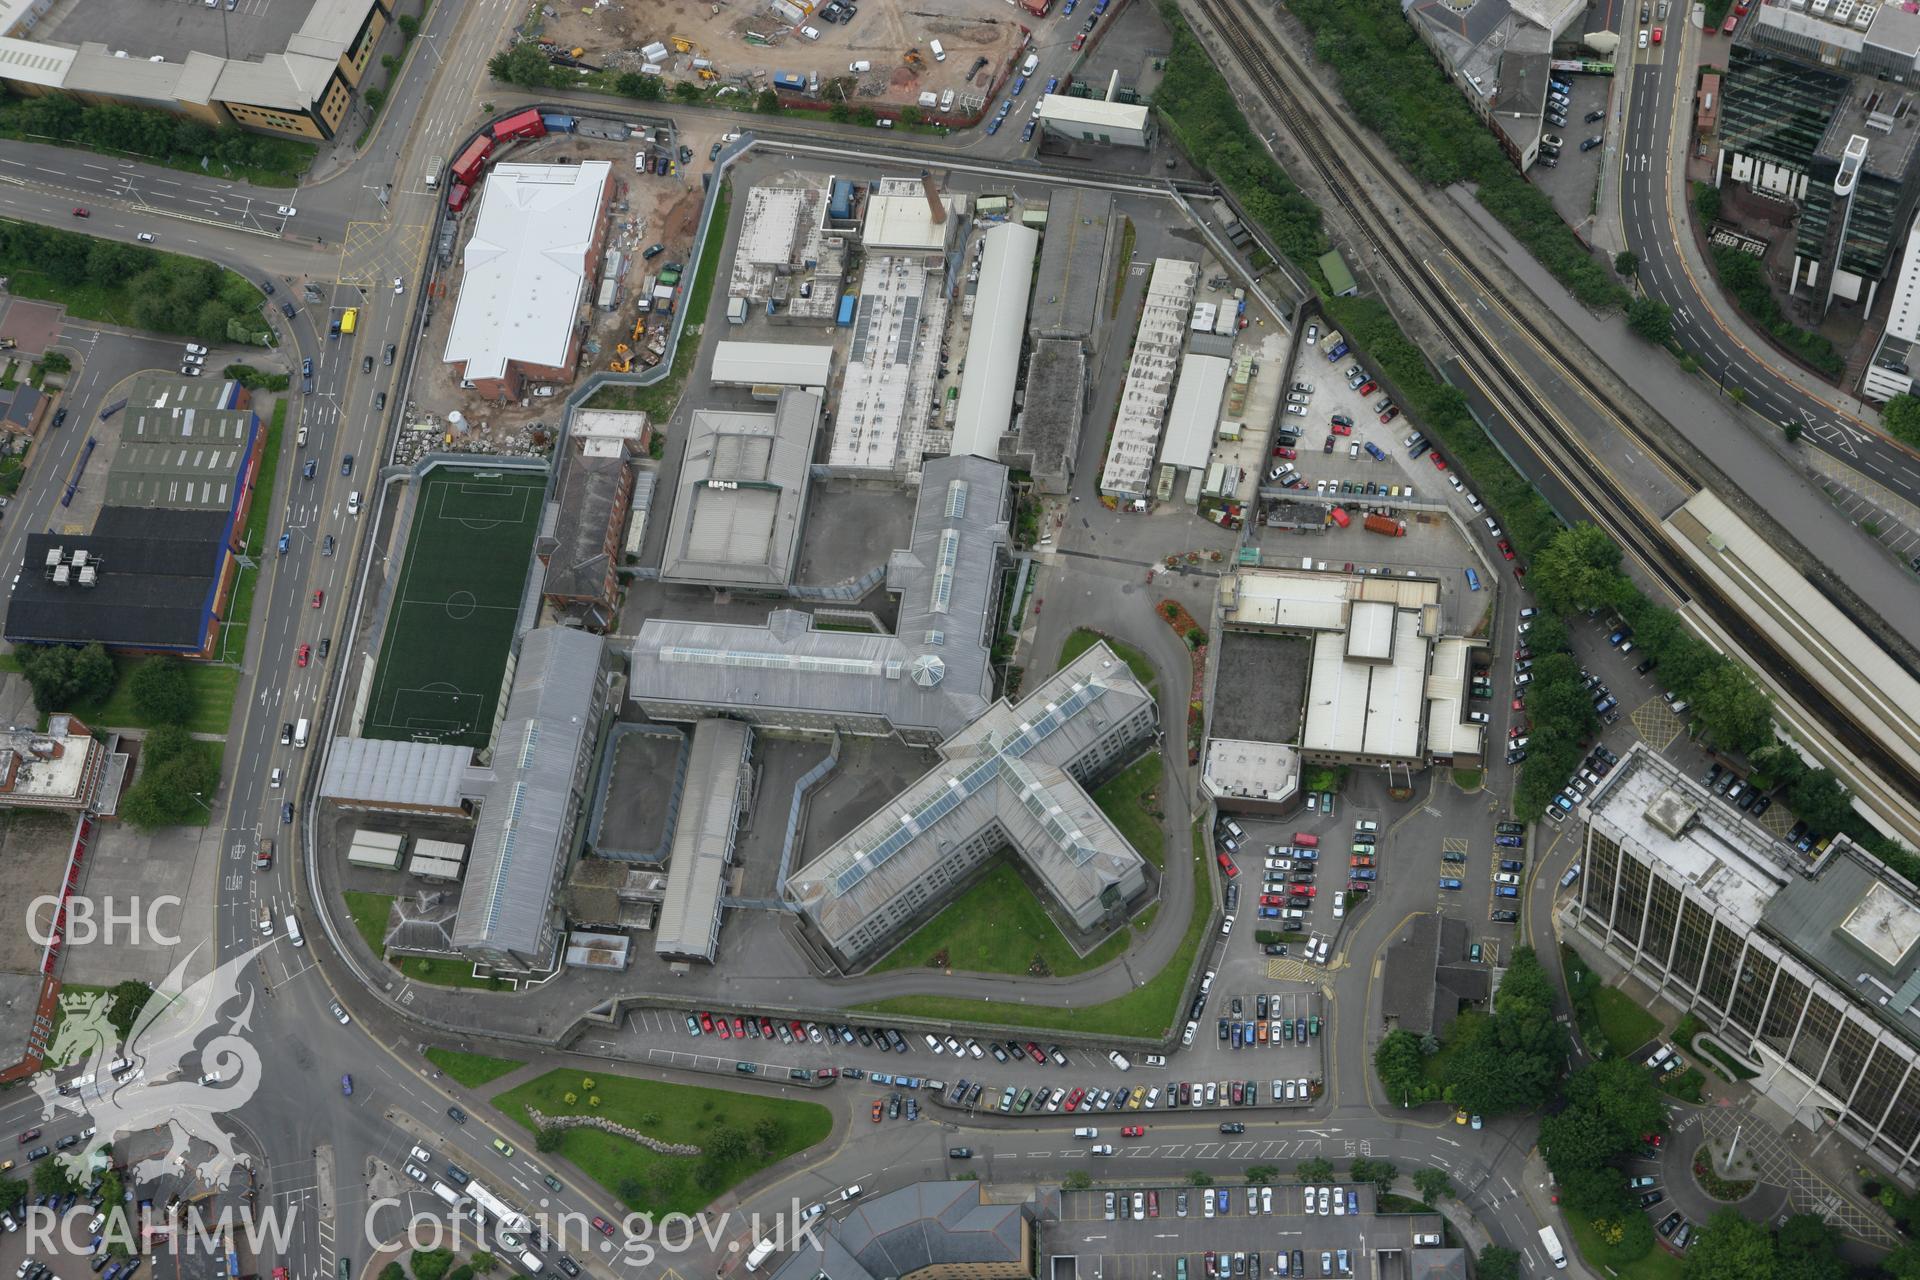 cardiff prison visits on remand